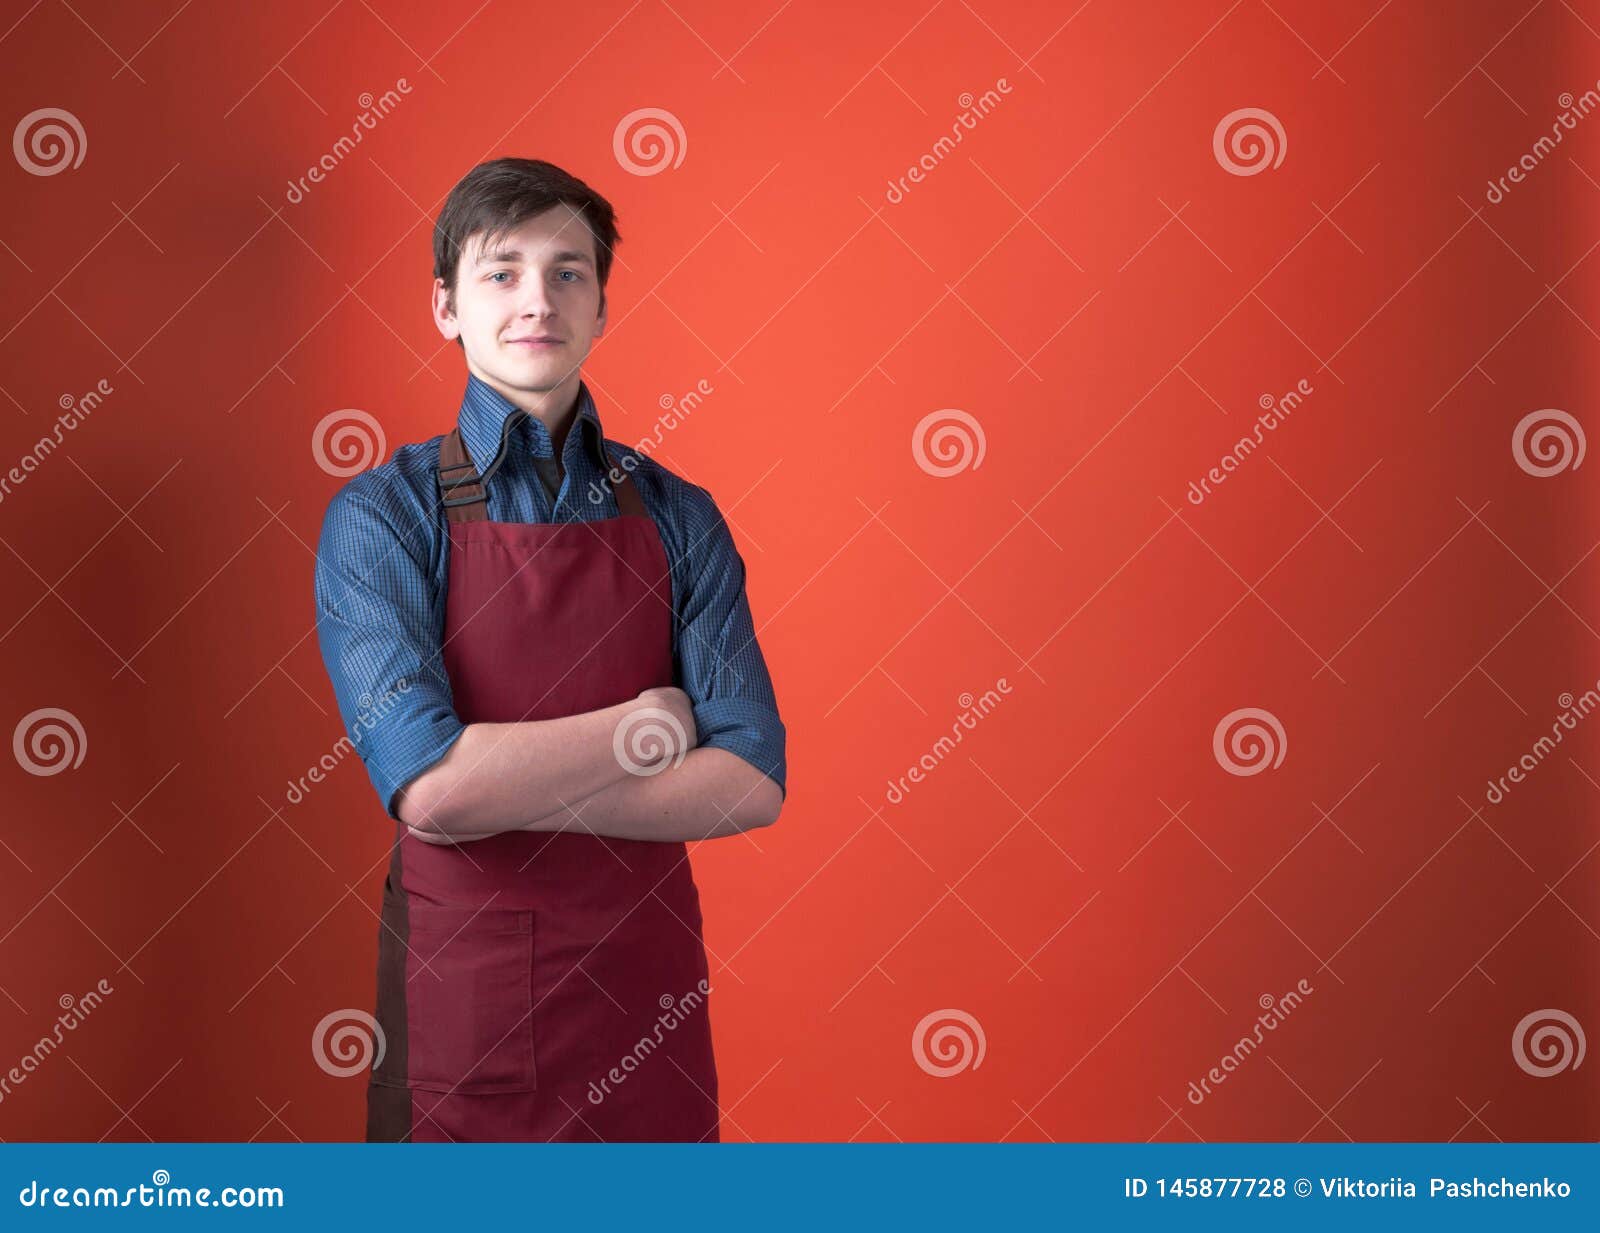 Smiling Handsome Barista With Dark Hair In Burgundy Apron